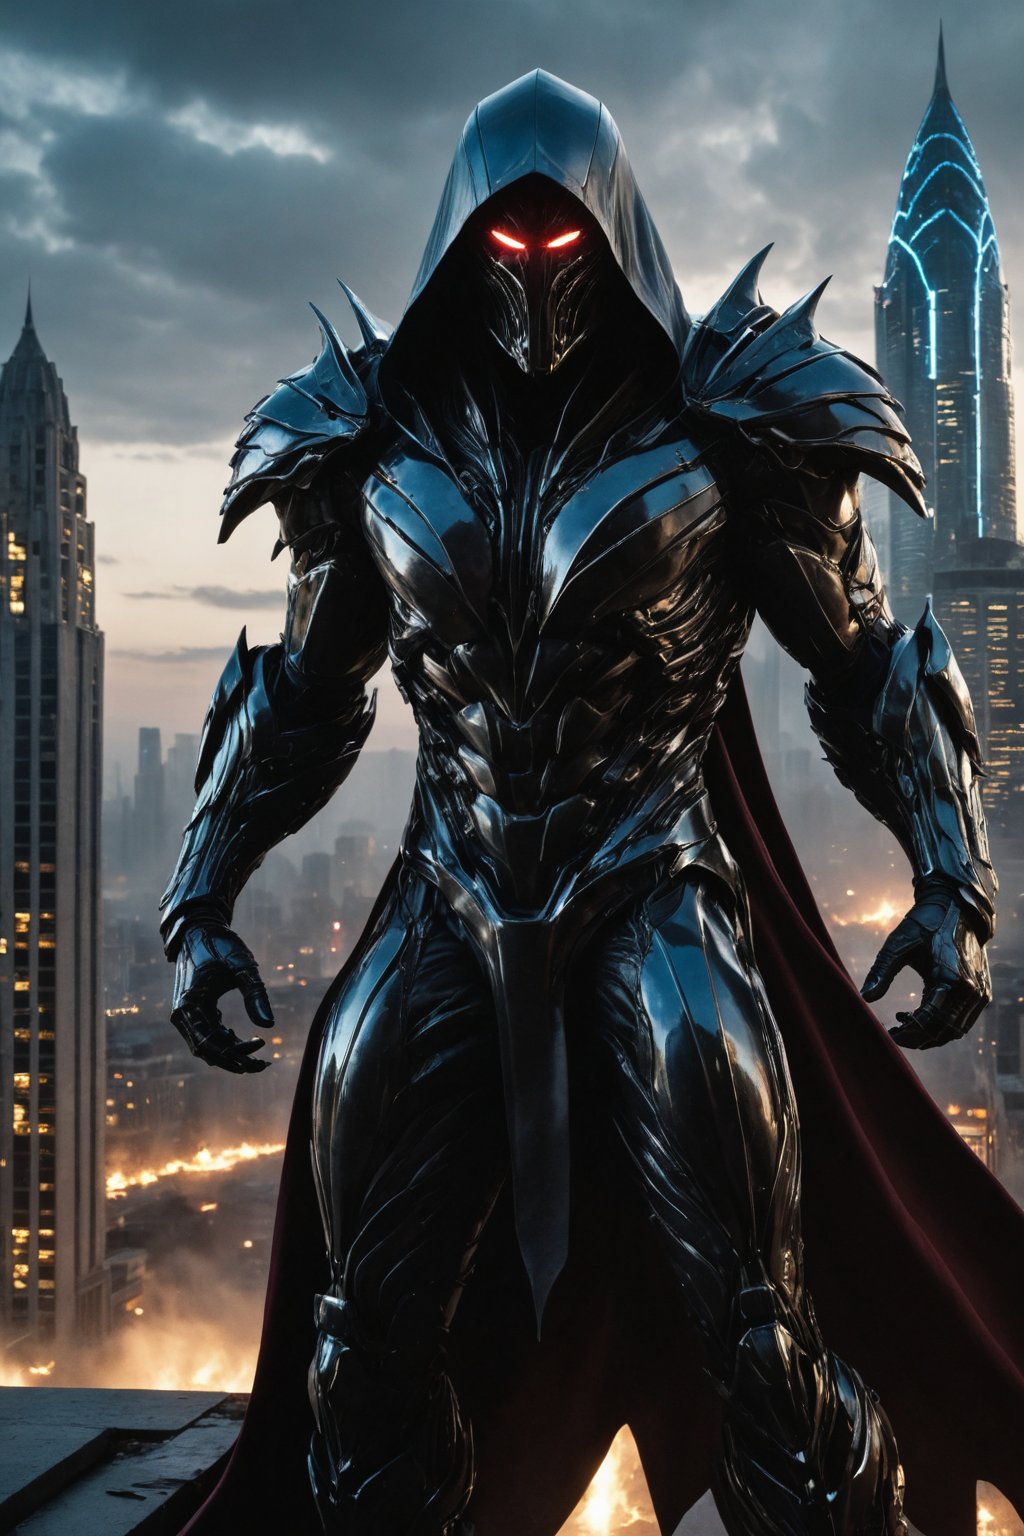 A futuristic super hero stands tall, full-body portrait in polished chrome armor with intricate gold and burgundy accents. Glowing blue eyes pierce through the darkness, illuminating a cityscape at dusk. Craig Mullins and H.R. Giger's character design brings forth a sense of otherworldly strength. Realistic digital painting captures every detail, from the armored suit to the subject's determined pose. Cinematic lighting highlights the hero's figure against a misty blue-gray sky, as if suspended in mid-air. A 4K resolution masterpiece, this portrait embodies the essence of futuristic super heroism, (boiling black wood material), a cloak with a hood is put on top 